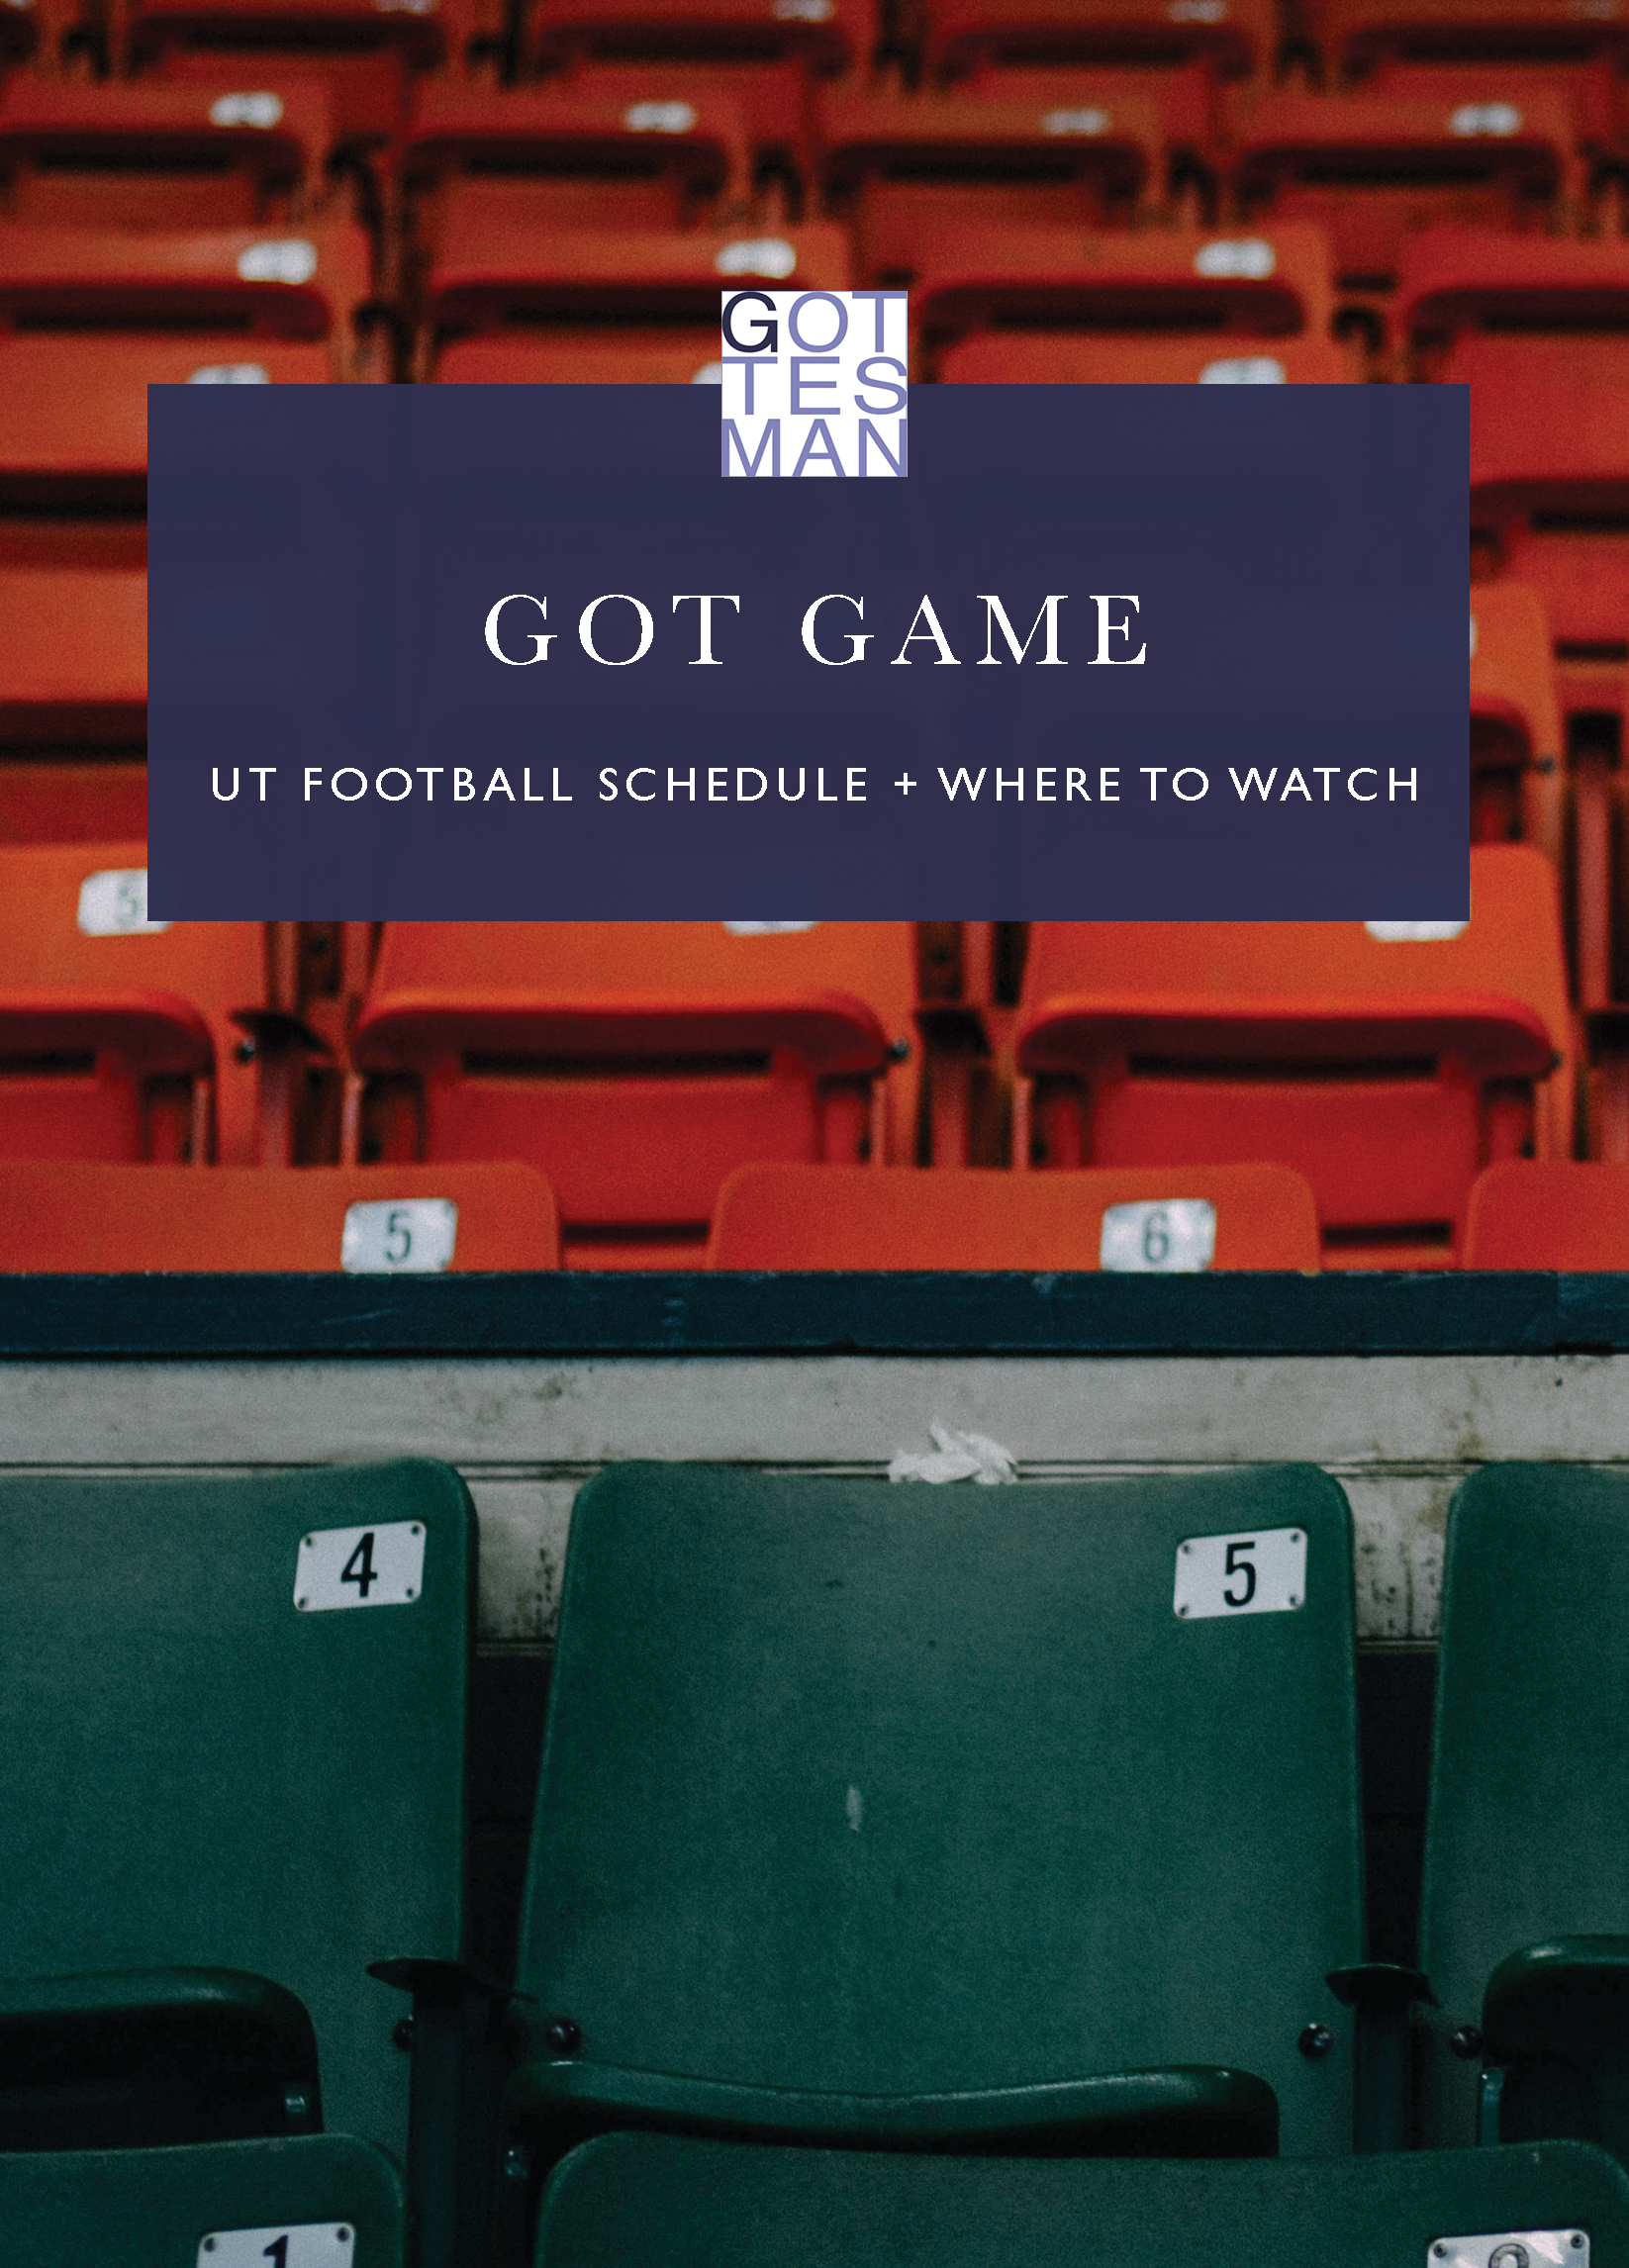 "Got Game: UT Football Schedule and Where to Watch"